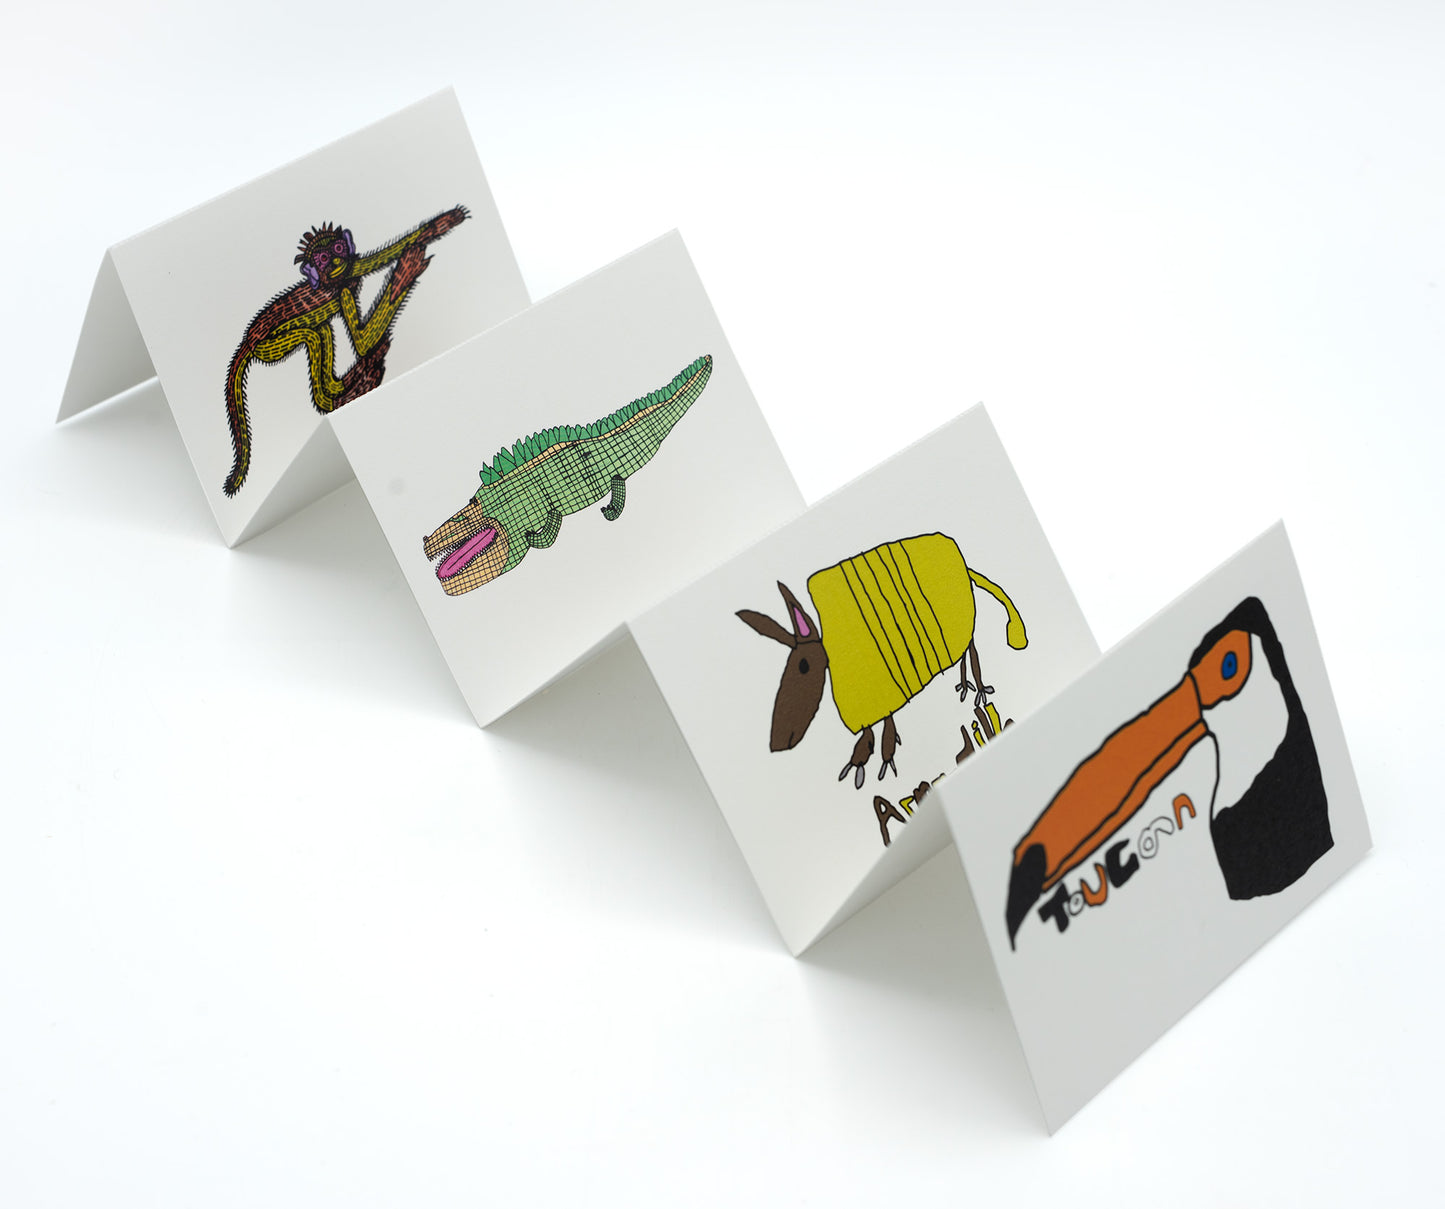 Constantina card pack placed in a white background featuring various wild animals